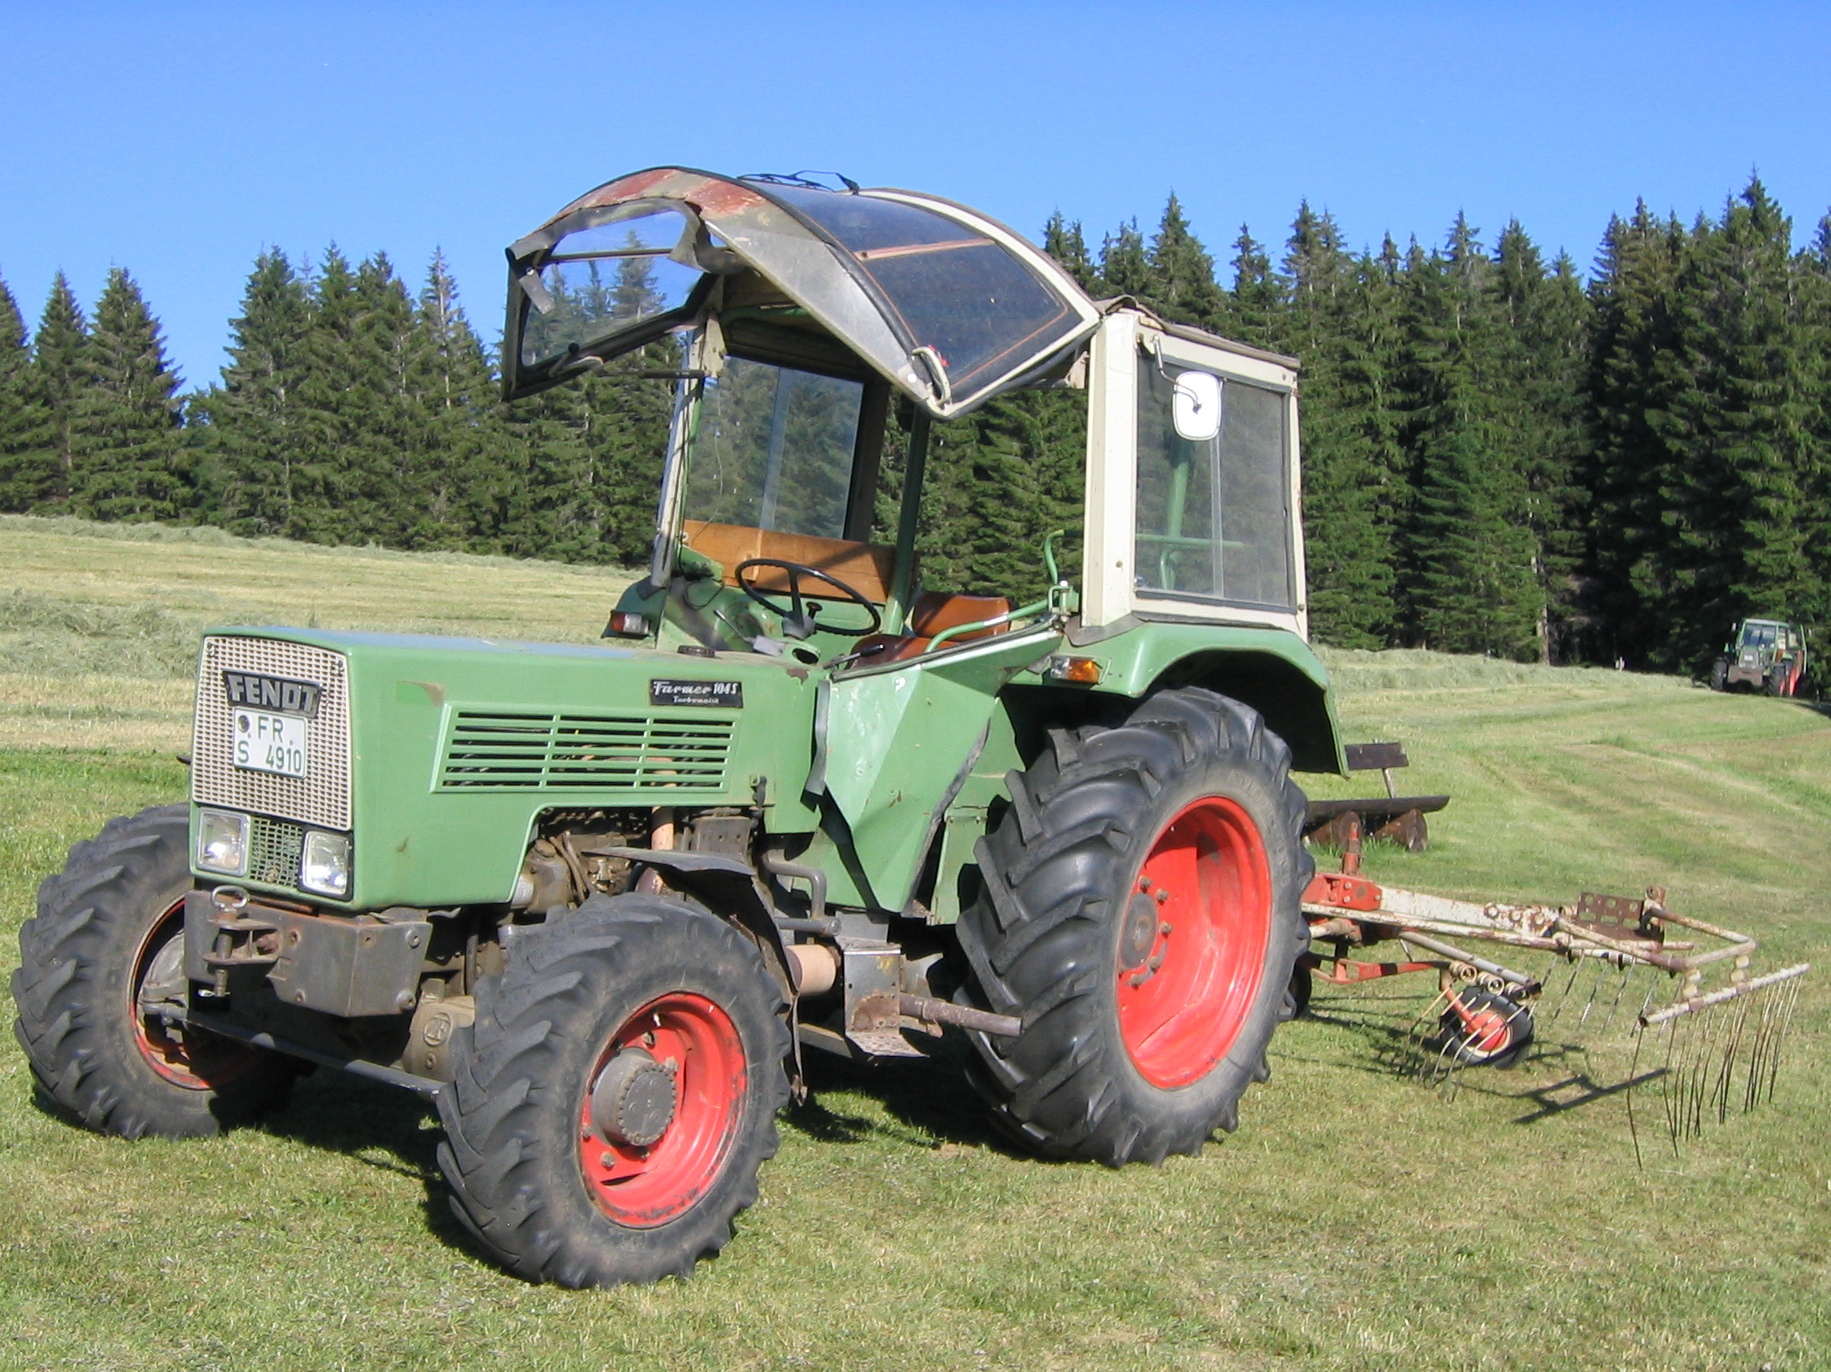 Fendt 756 Photo Gallery: Photo #04 out of 5, Image Size - 400 x 300 px